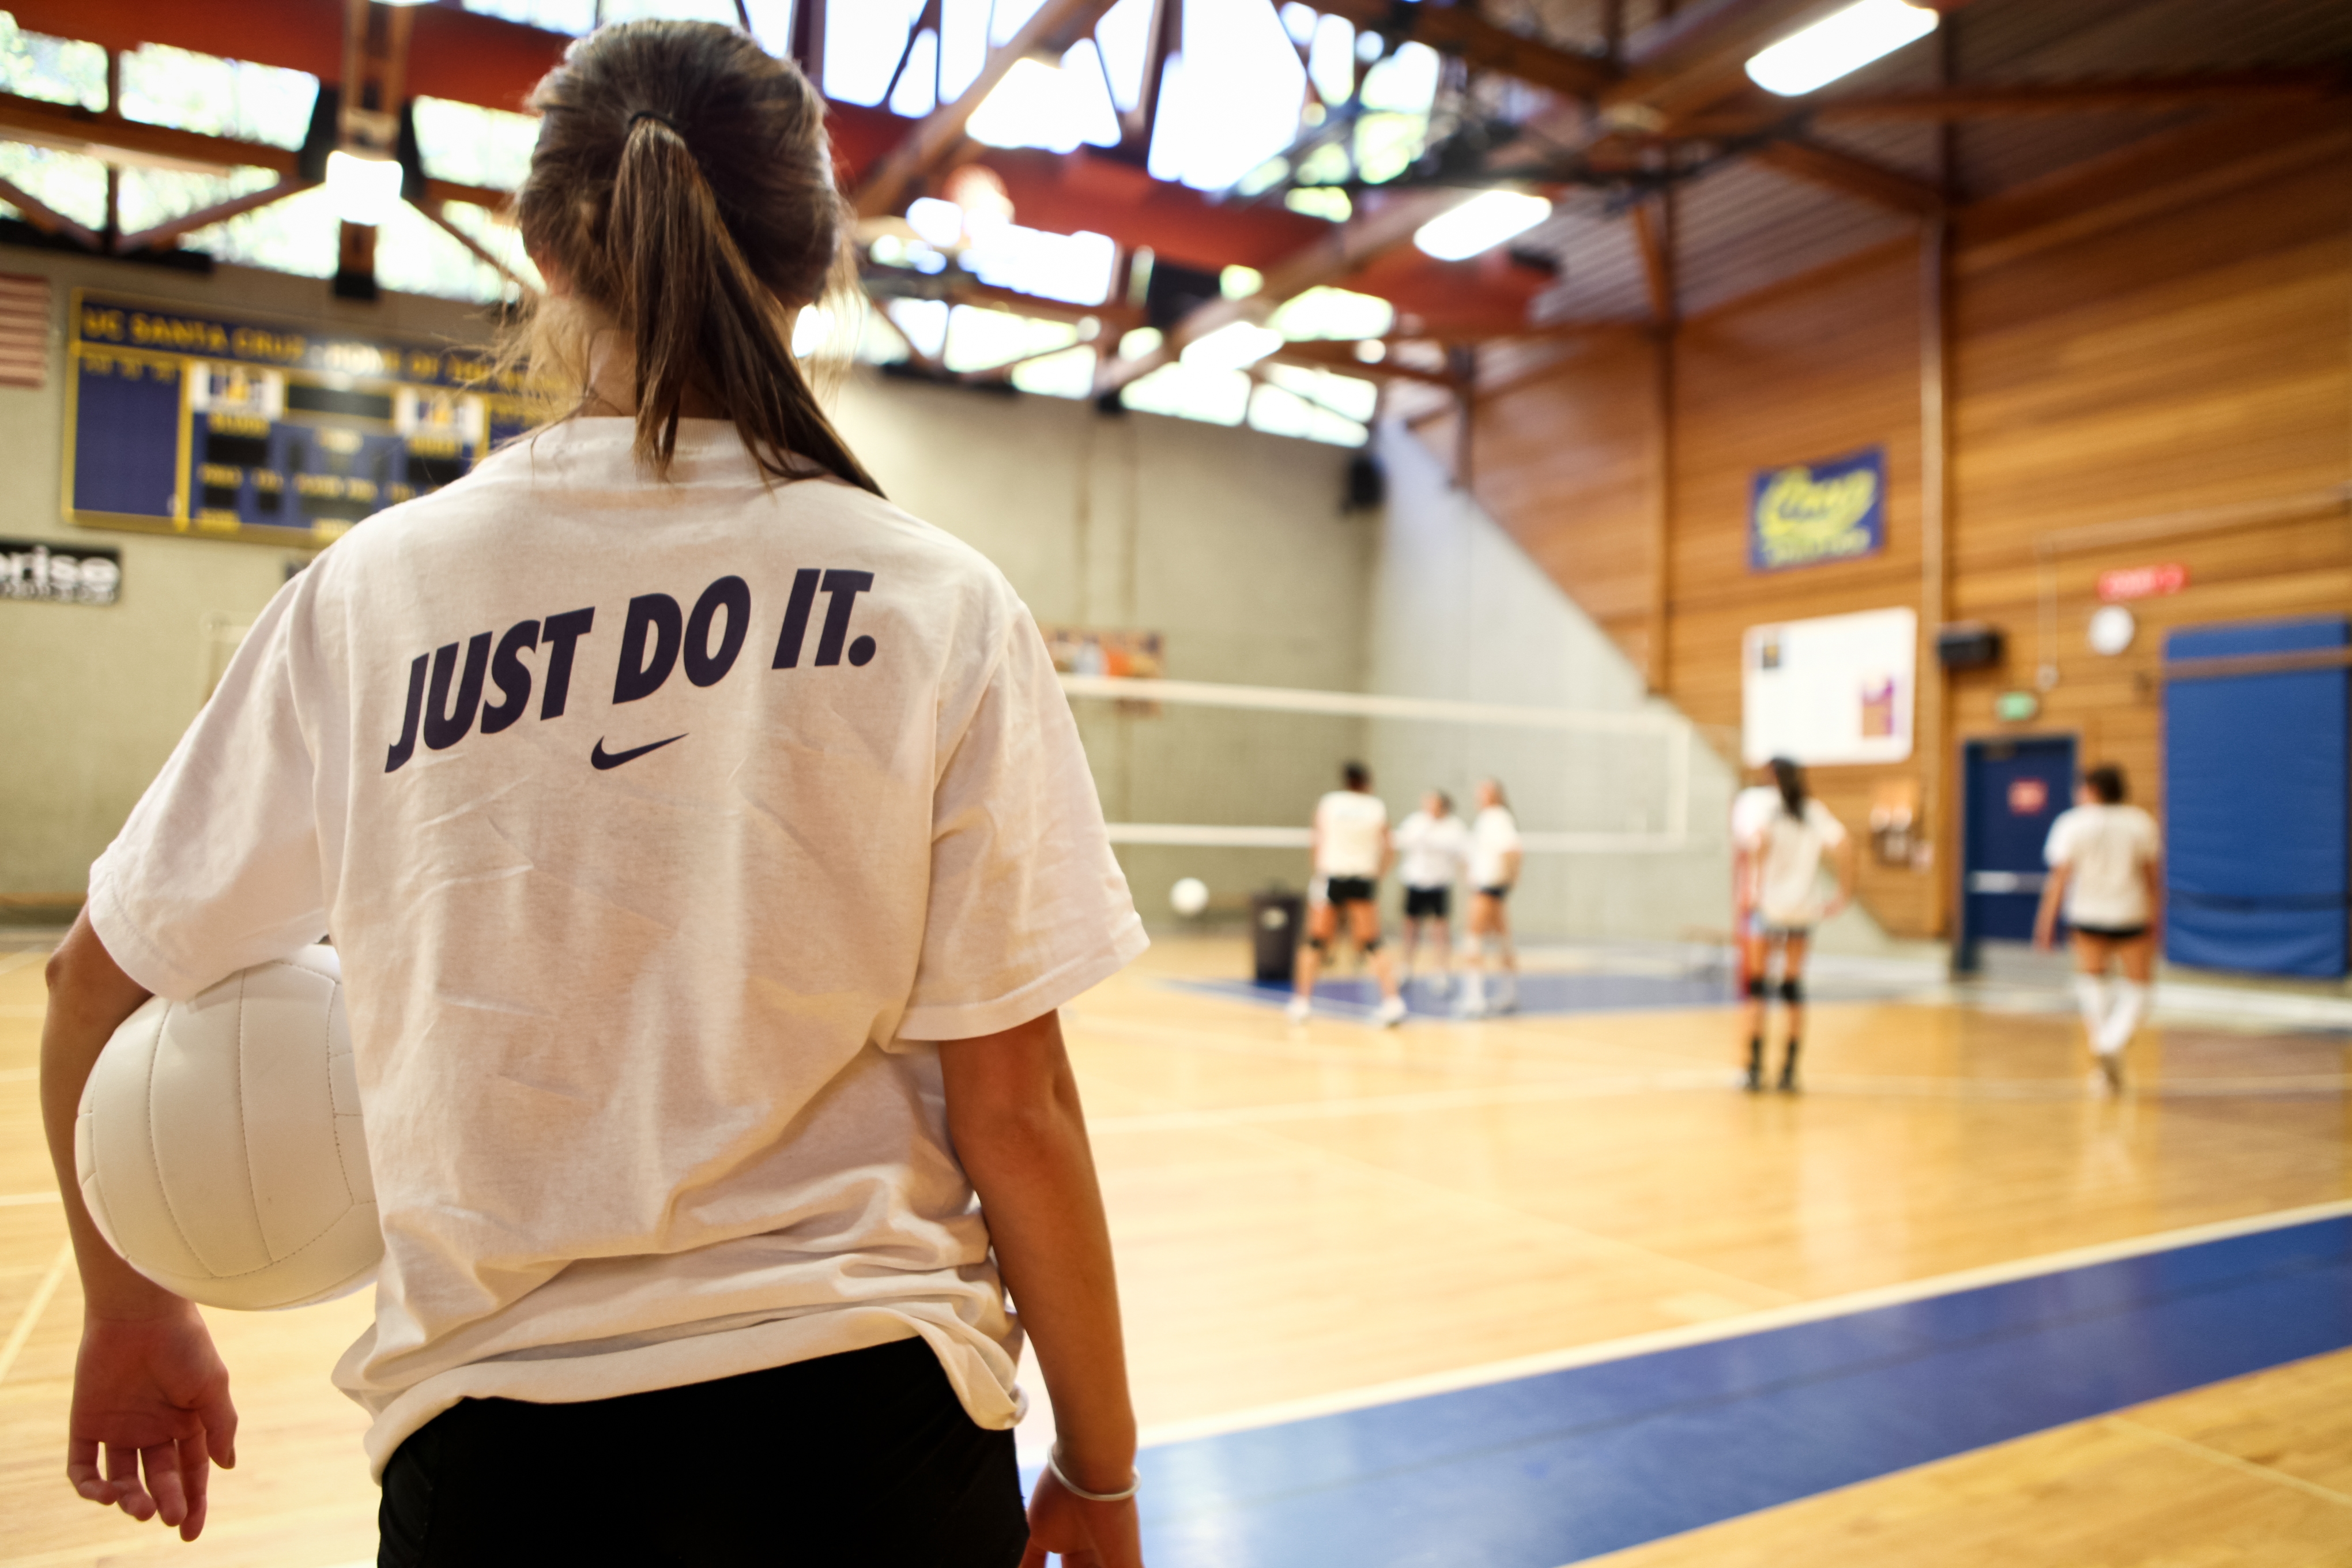 nike volleyball camp discount code 2019